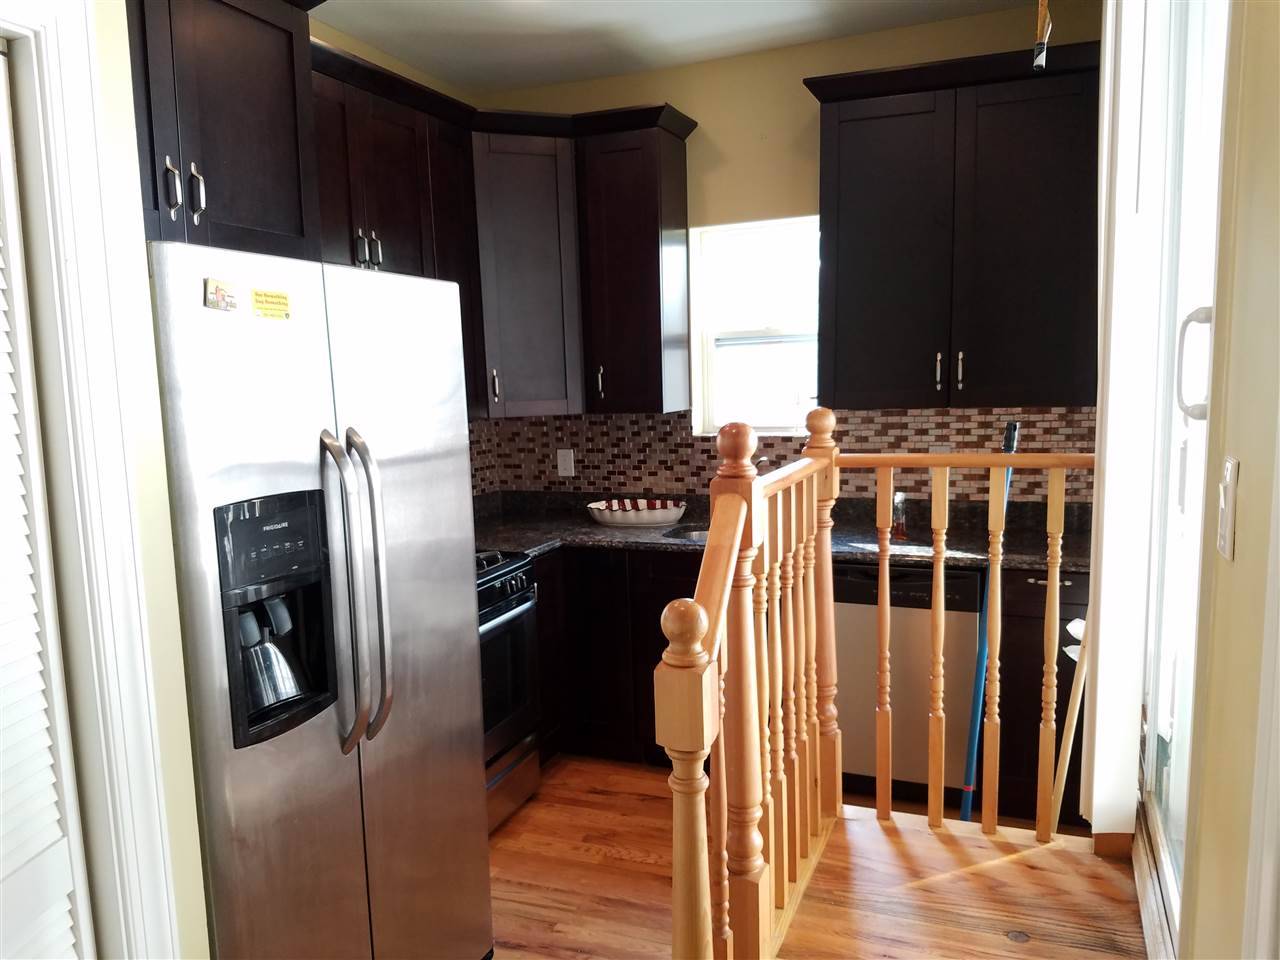 This beautiful and spacious 1 bedroom apt - 1 BR The Heights New Jersey